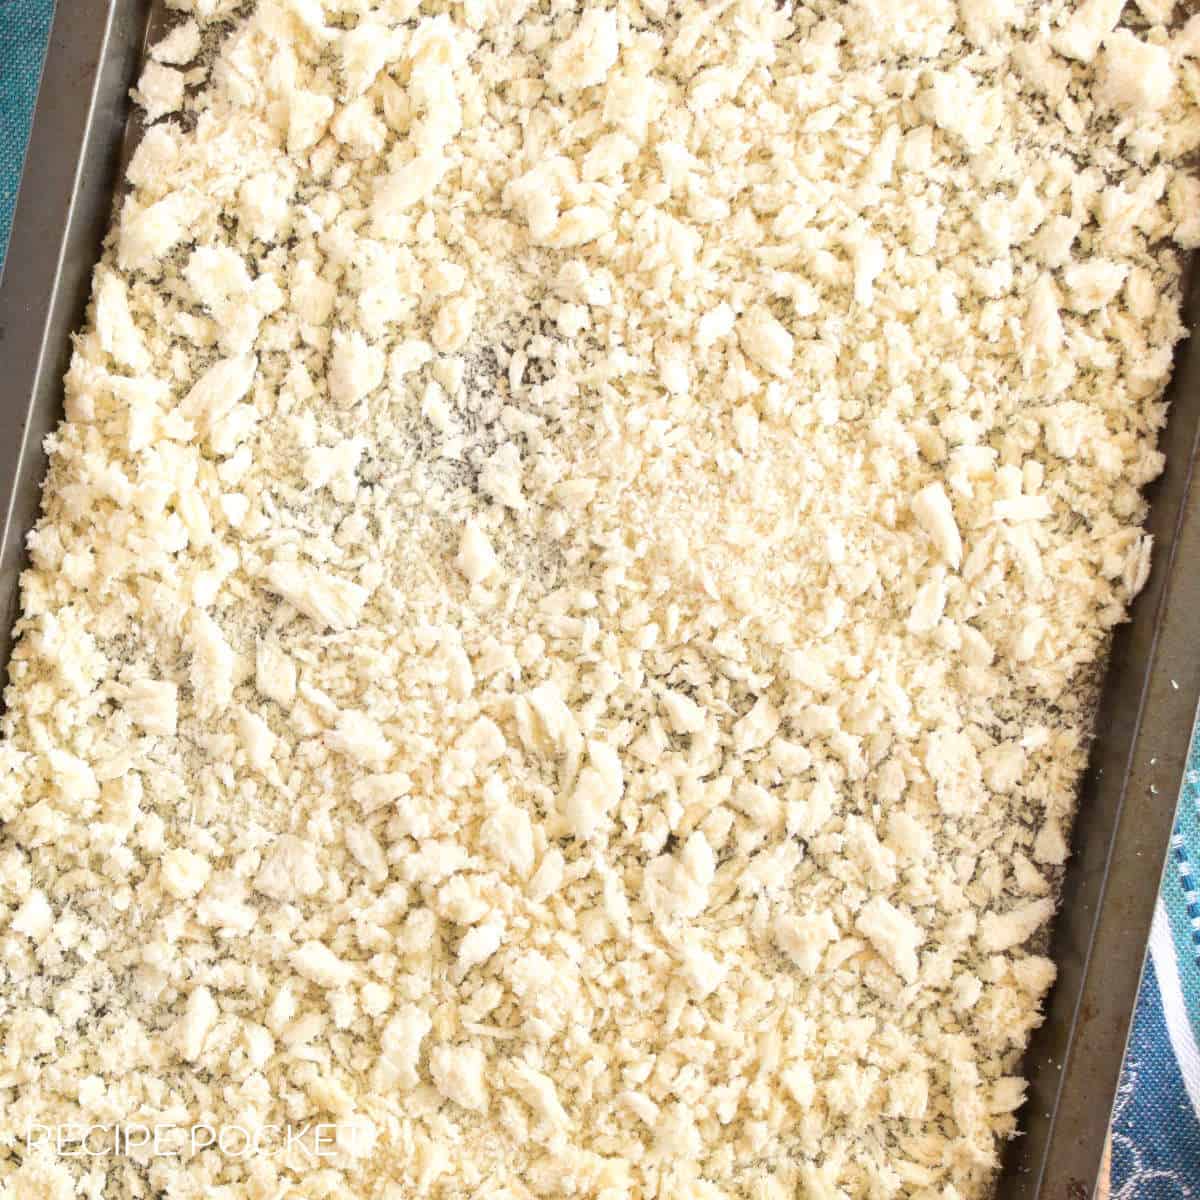 A tray of oven dried bread crumbs.